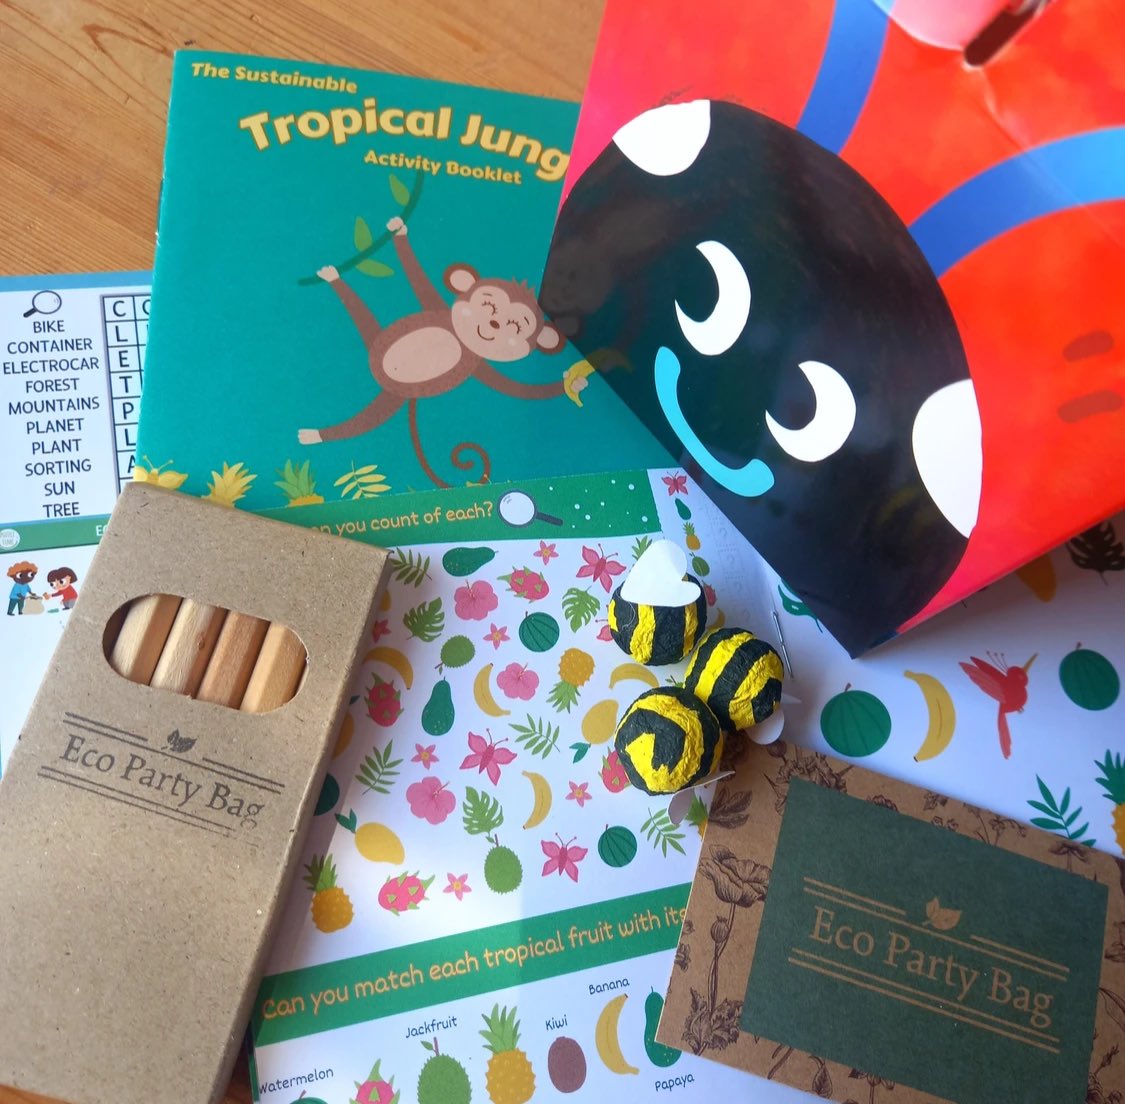 Thank you ecopartybag.co.uk for choosing to stock our recycled children’s activity books on your earth-saving website Eco Party Bag. Purchases such as these help us cover the costs of running our environmental projects. It’s inspiring and reassuring to see your success 💚🌏